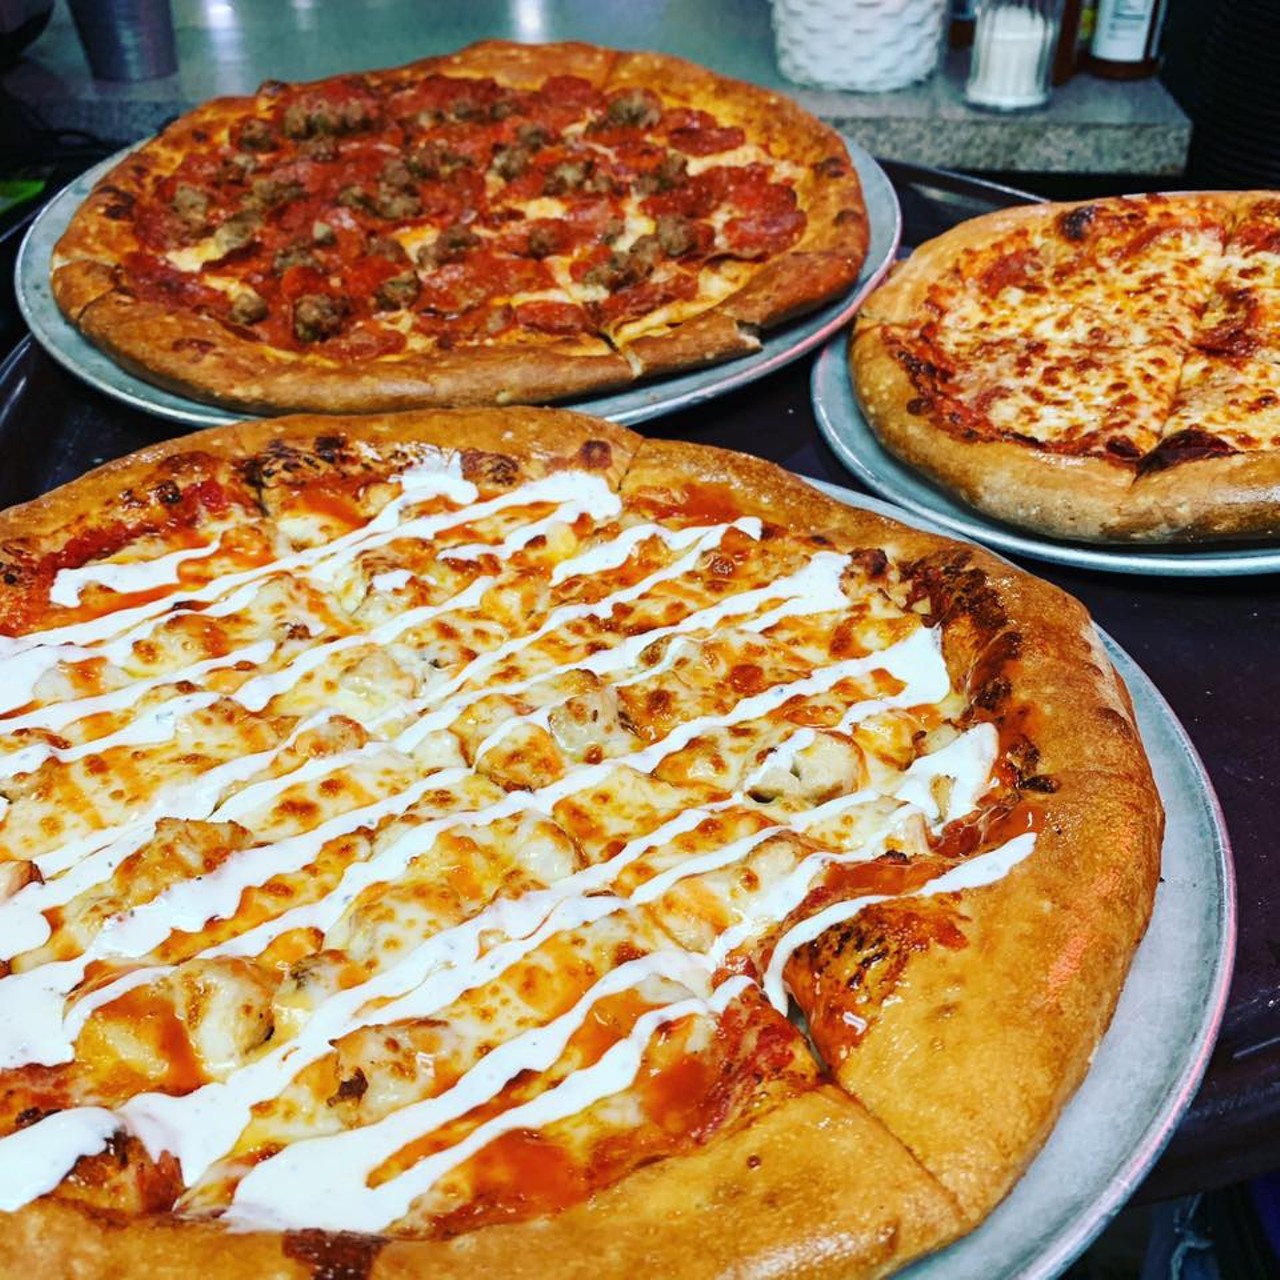 Maars Pizza
14218 Nacogdoches Road, (210) 599-7400, maarspizzaandmore.com
Maars Pizza has a huge menu, with build-your-own pie sizes ranging from 8 inches to 28, plus wings, pastas and calzones. Order online or by phone if you fall within their newly expanded restaurant delivery area; otherwise, find them on Favor and GrubHub. 
Photo via Facebook /  
MAAR's PIzza & More